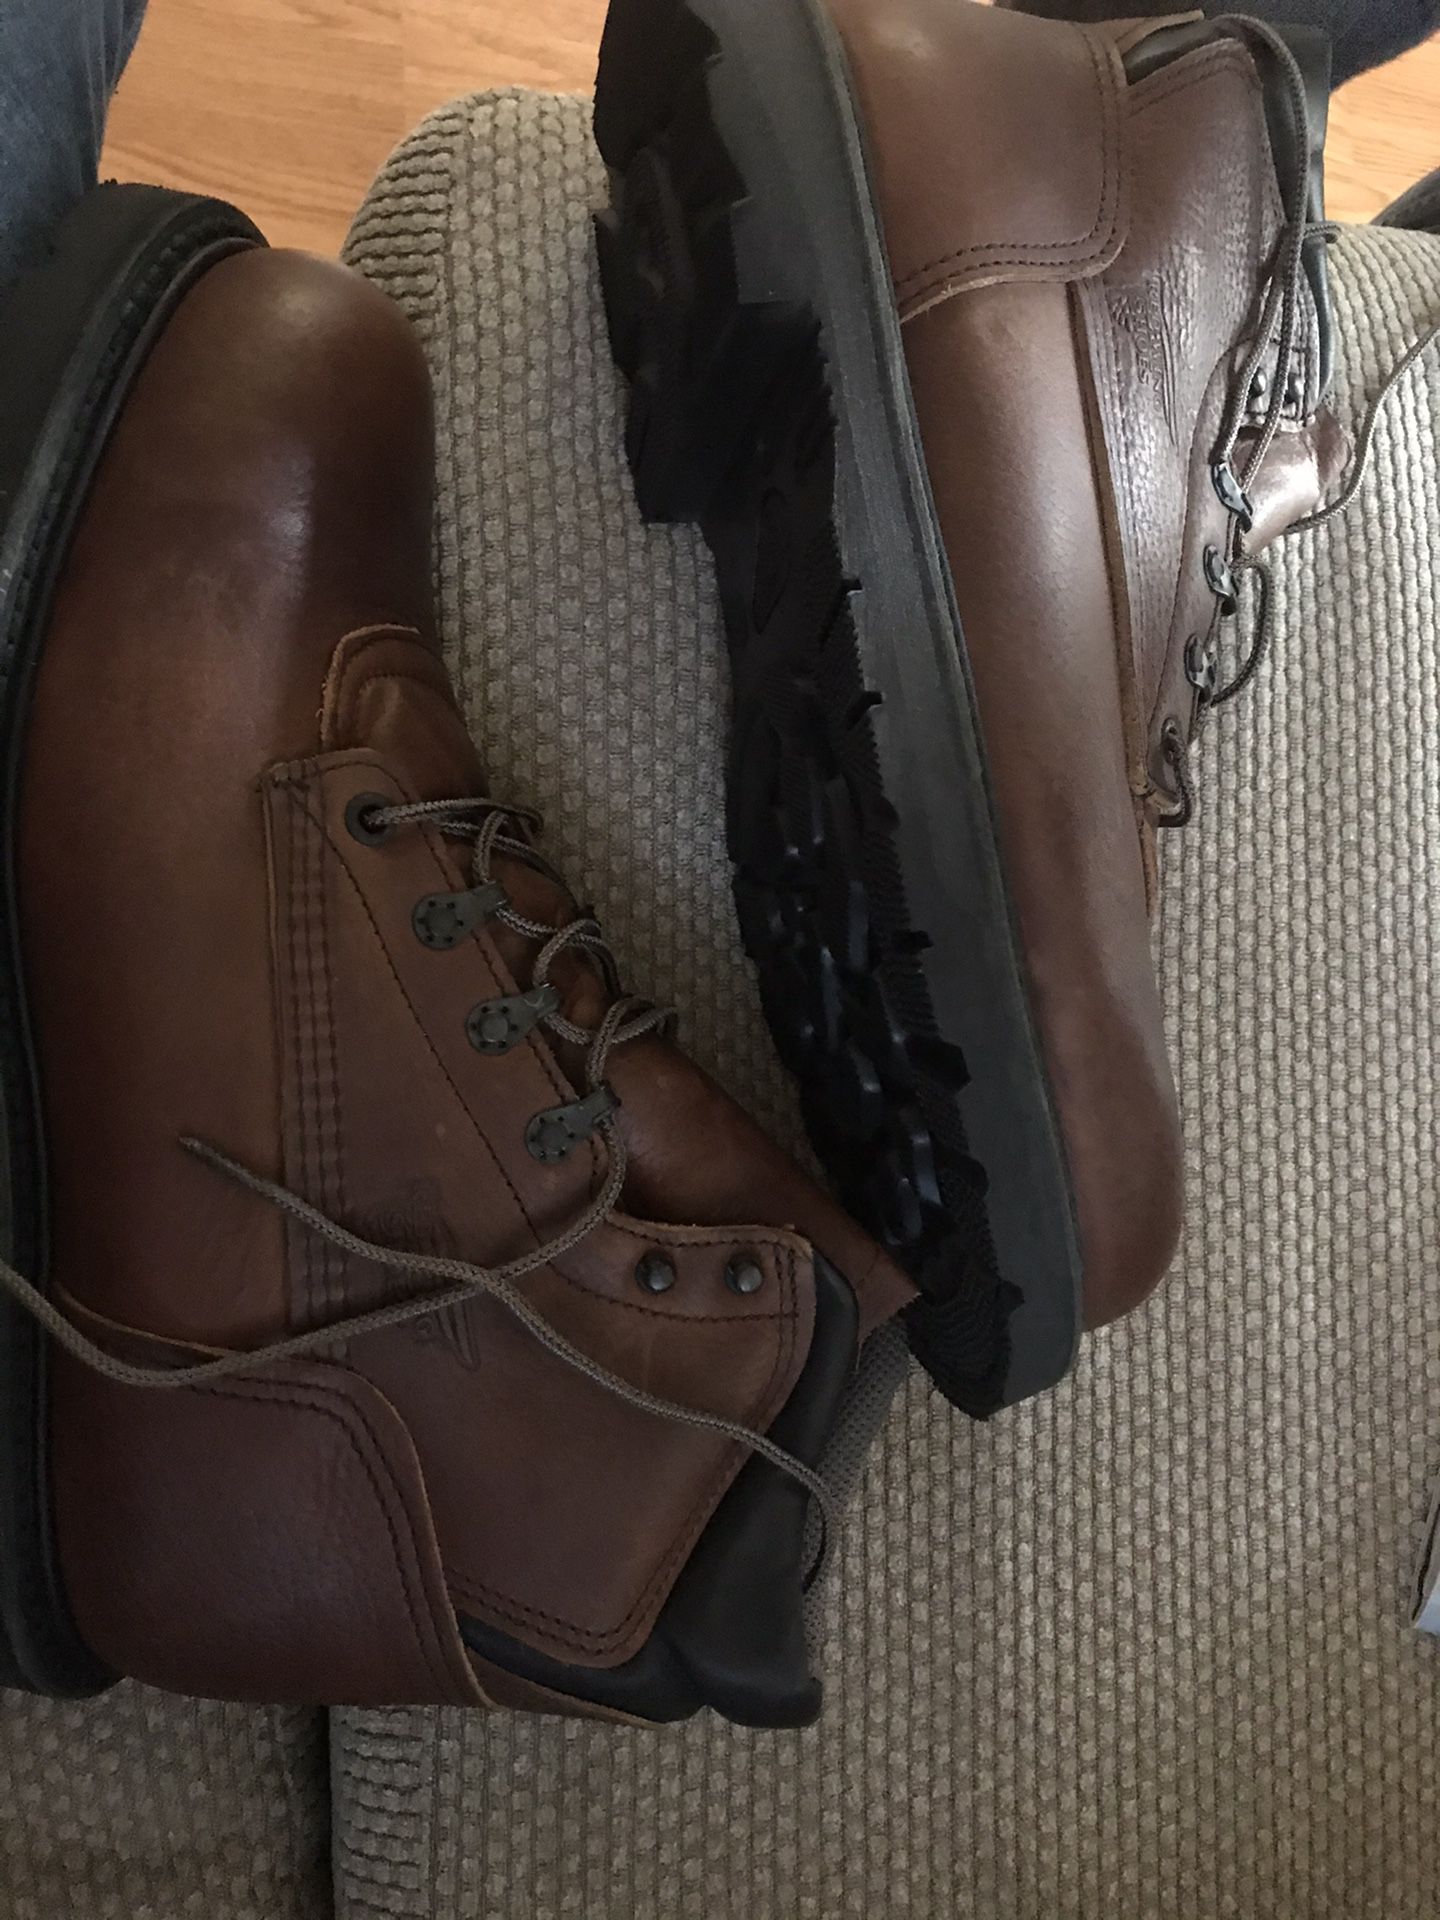 Red Wings Boots Steel Toe Size 9 1/2